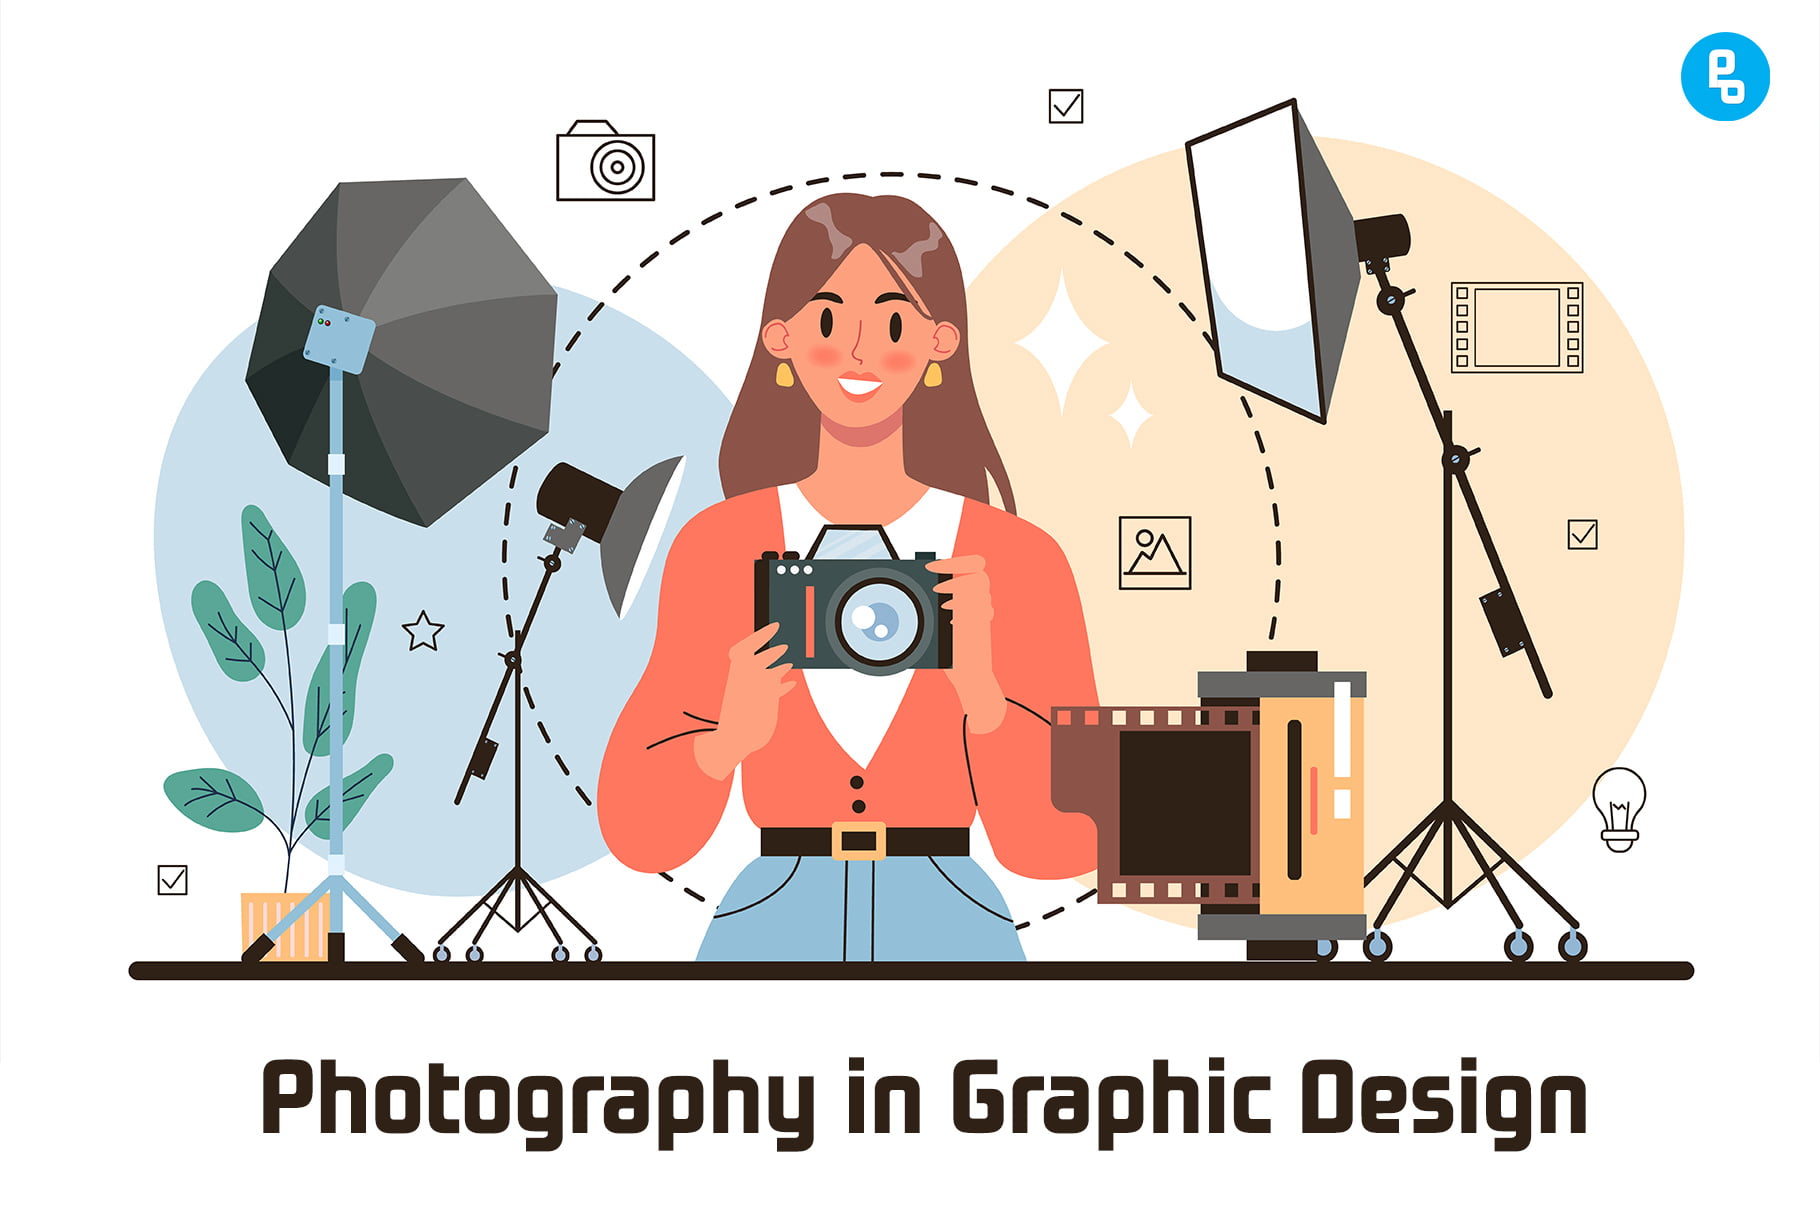 Top 12 Ways to Use Photography in Graphic Design